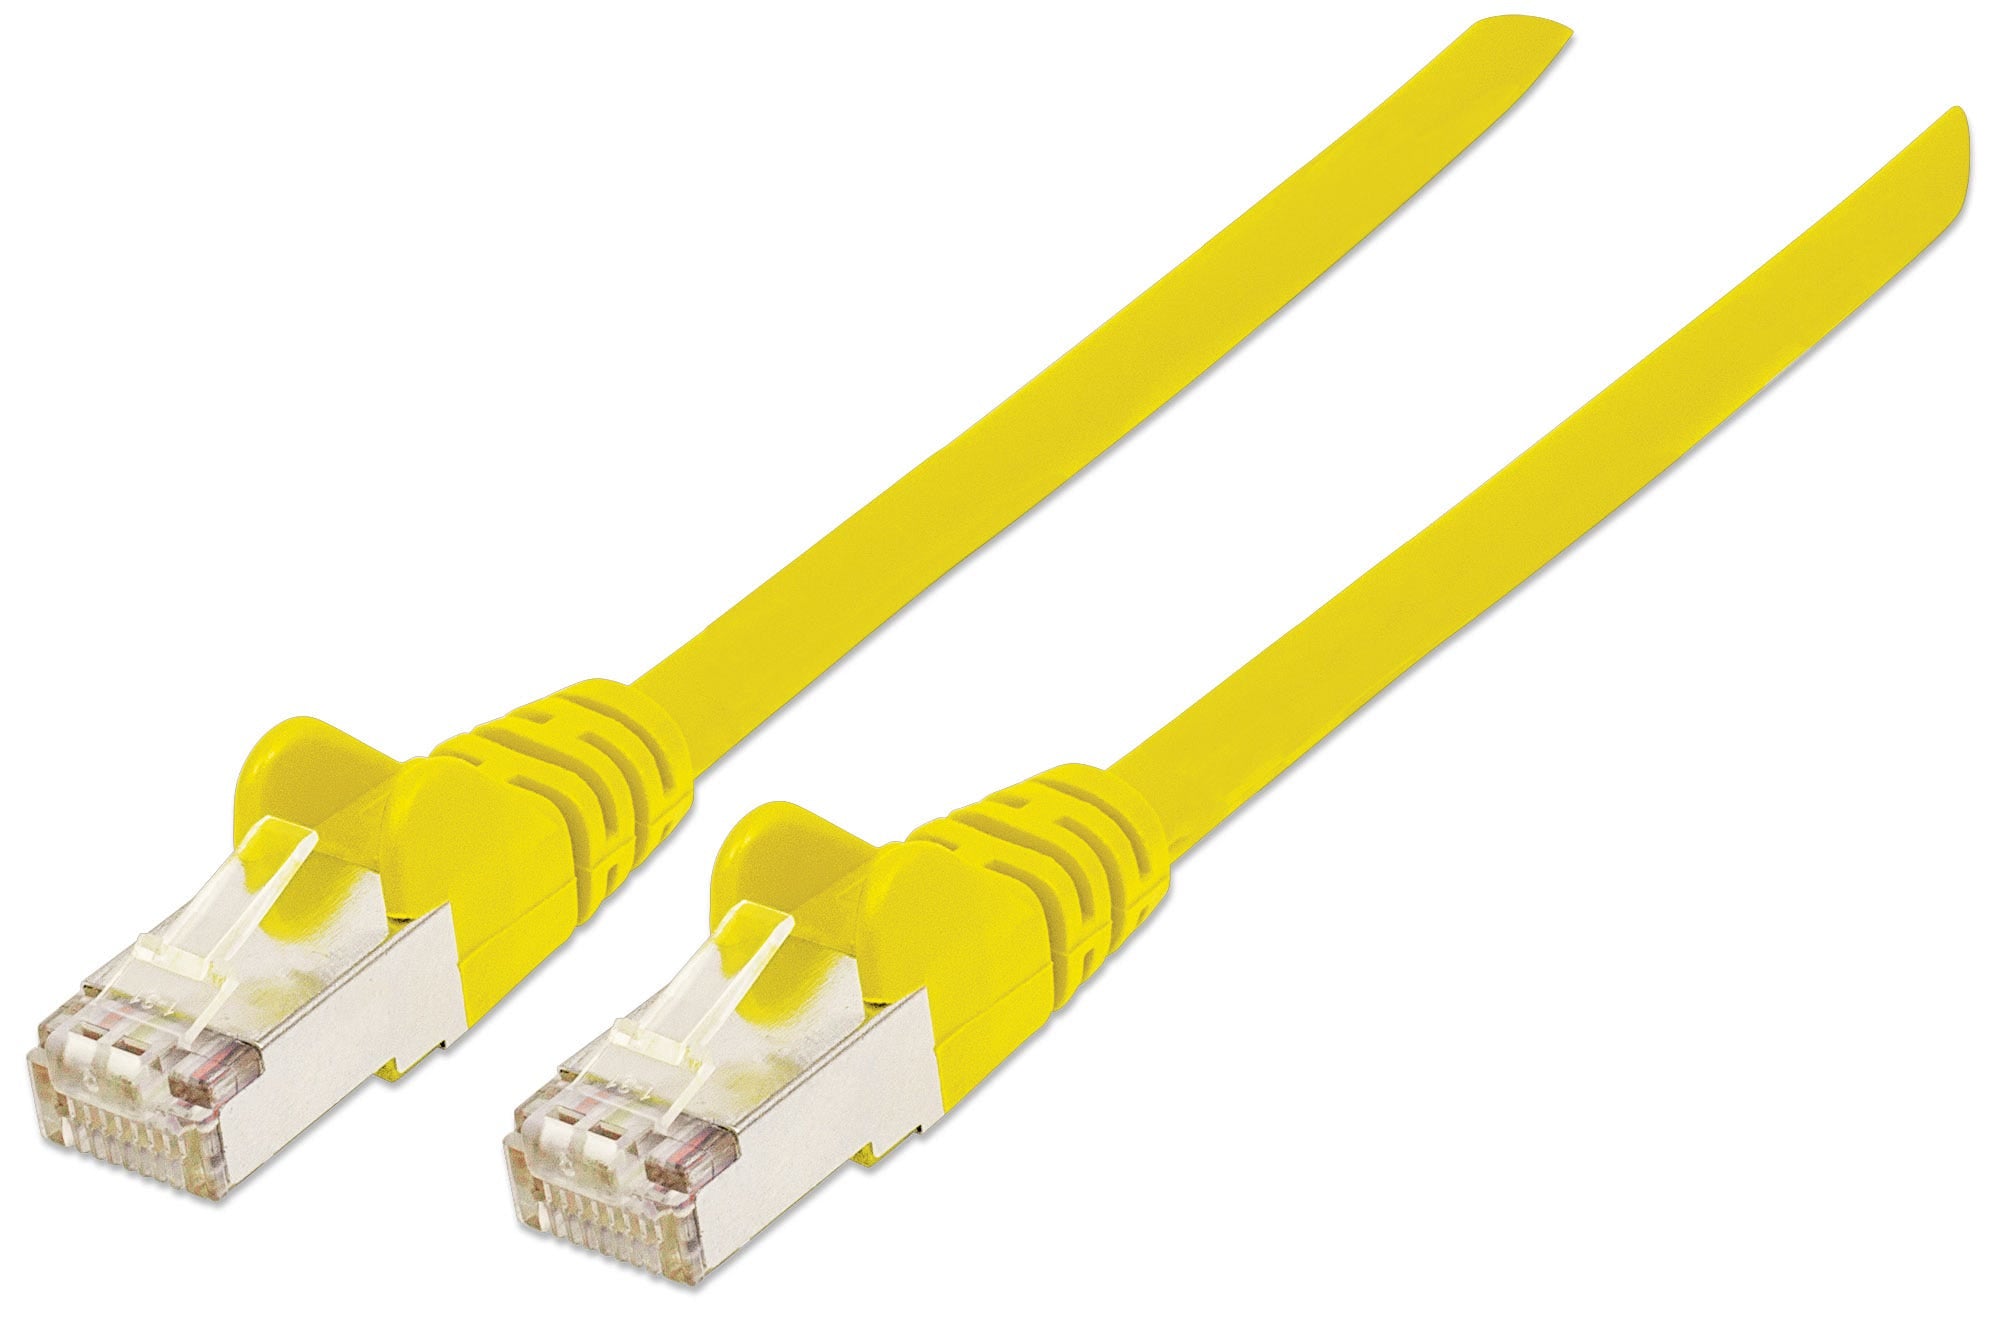 Intellinet Network Patch Cable, Cat6A, 5m, Yellow, Copper, S/FTP, LSOH / LSZH, PVC, RJ45, Gold Plated Contacts, Snagless, Booted, Lifetime Warranty, Polybag